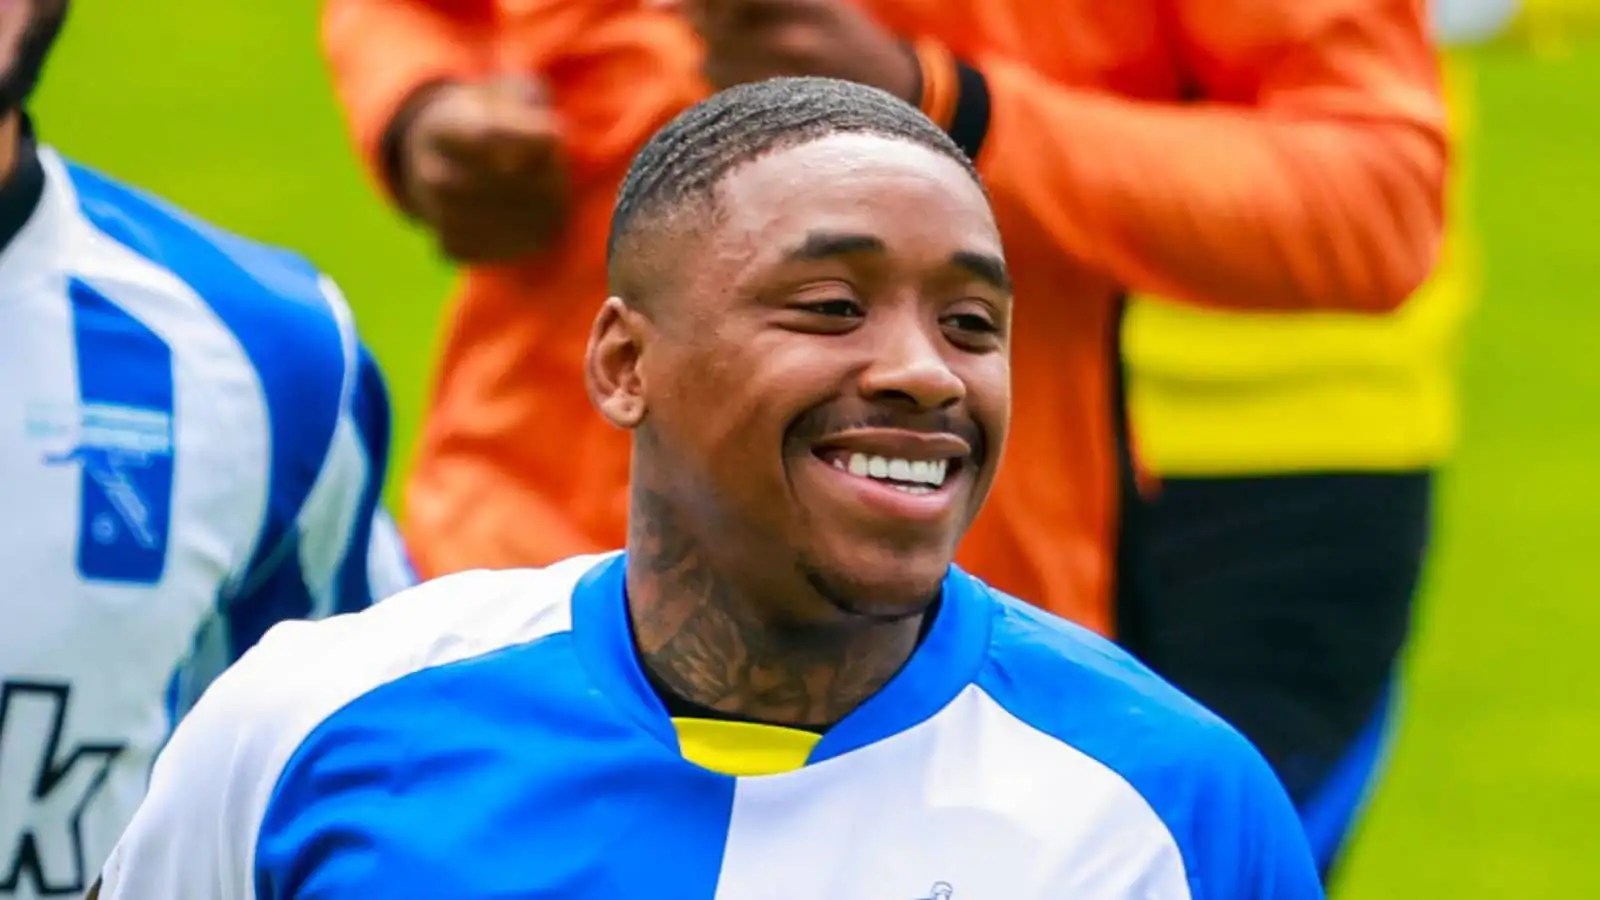 Steven Bergwijn smiling while in training with the Netherlands